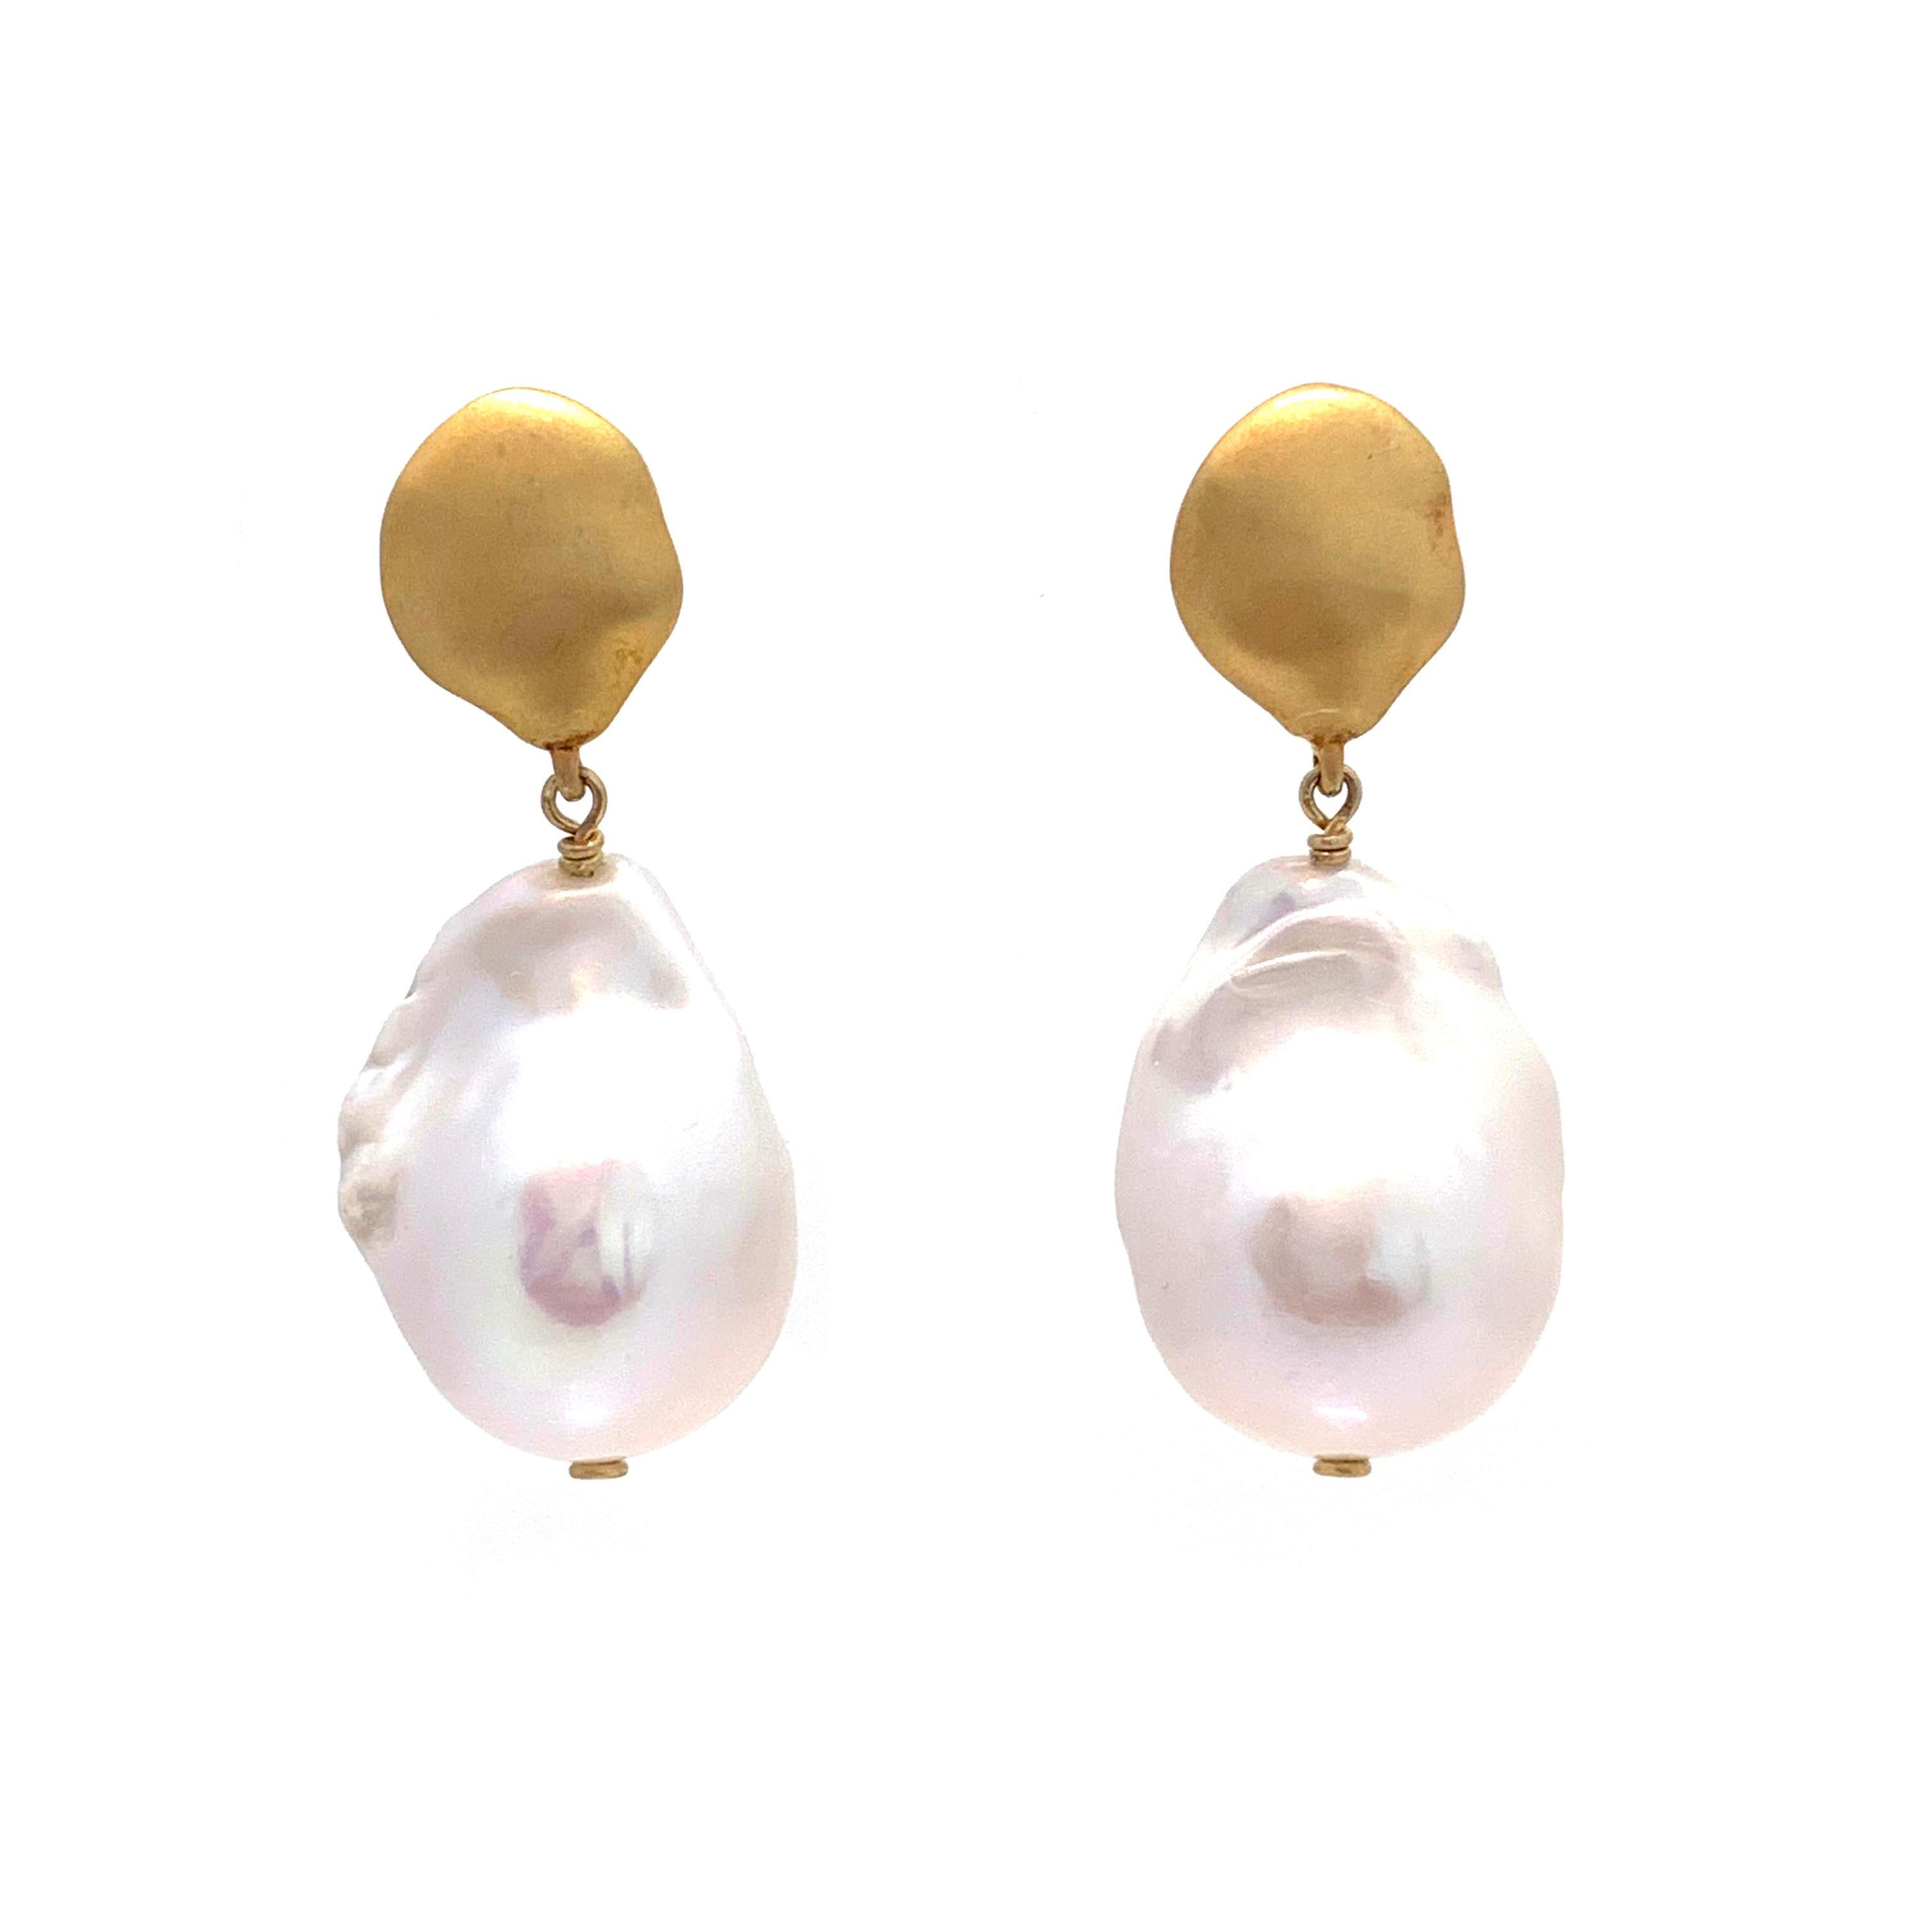 Beautiful pair of large lustrous freshwater baroque pearl drop earrings. The pearls measure 18mm width and 25mm height. Top part is in-house designed 18k gold vermeil sterling silver nugget (matte finish) - straight post with large friction back.